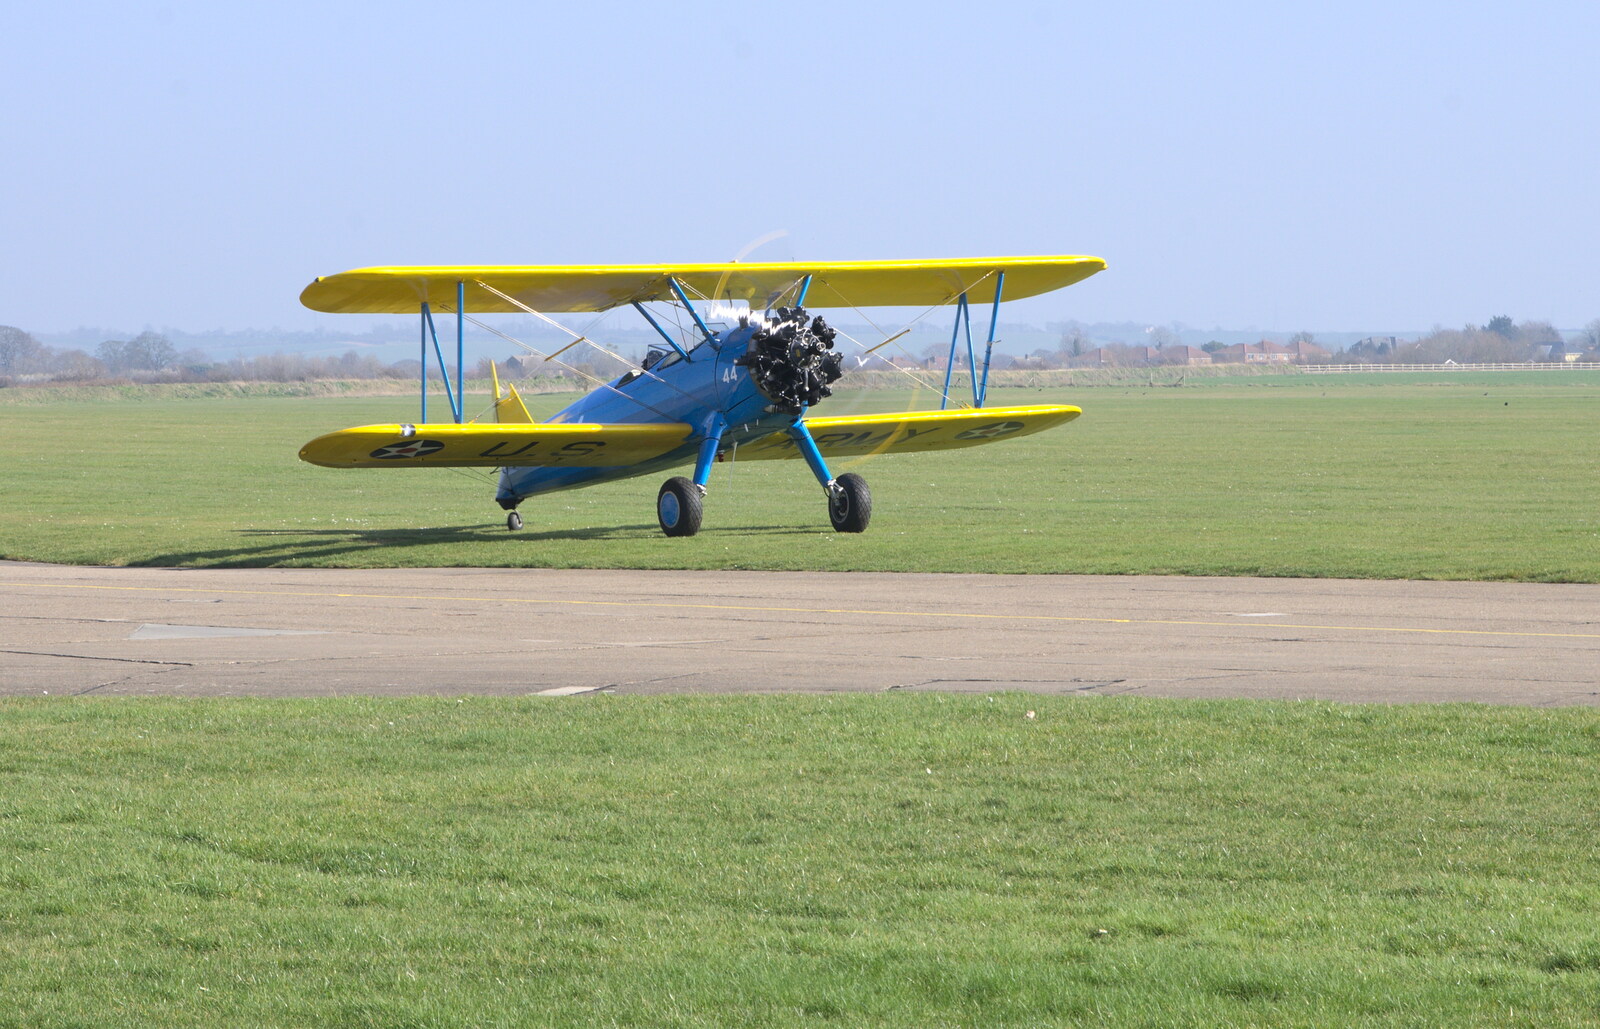 The Stearman taxis in from A Day Out at Duxford, Cambridgeshire - 9th March 2014